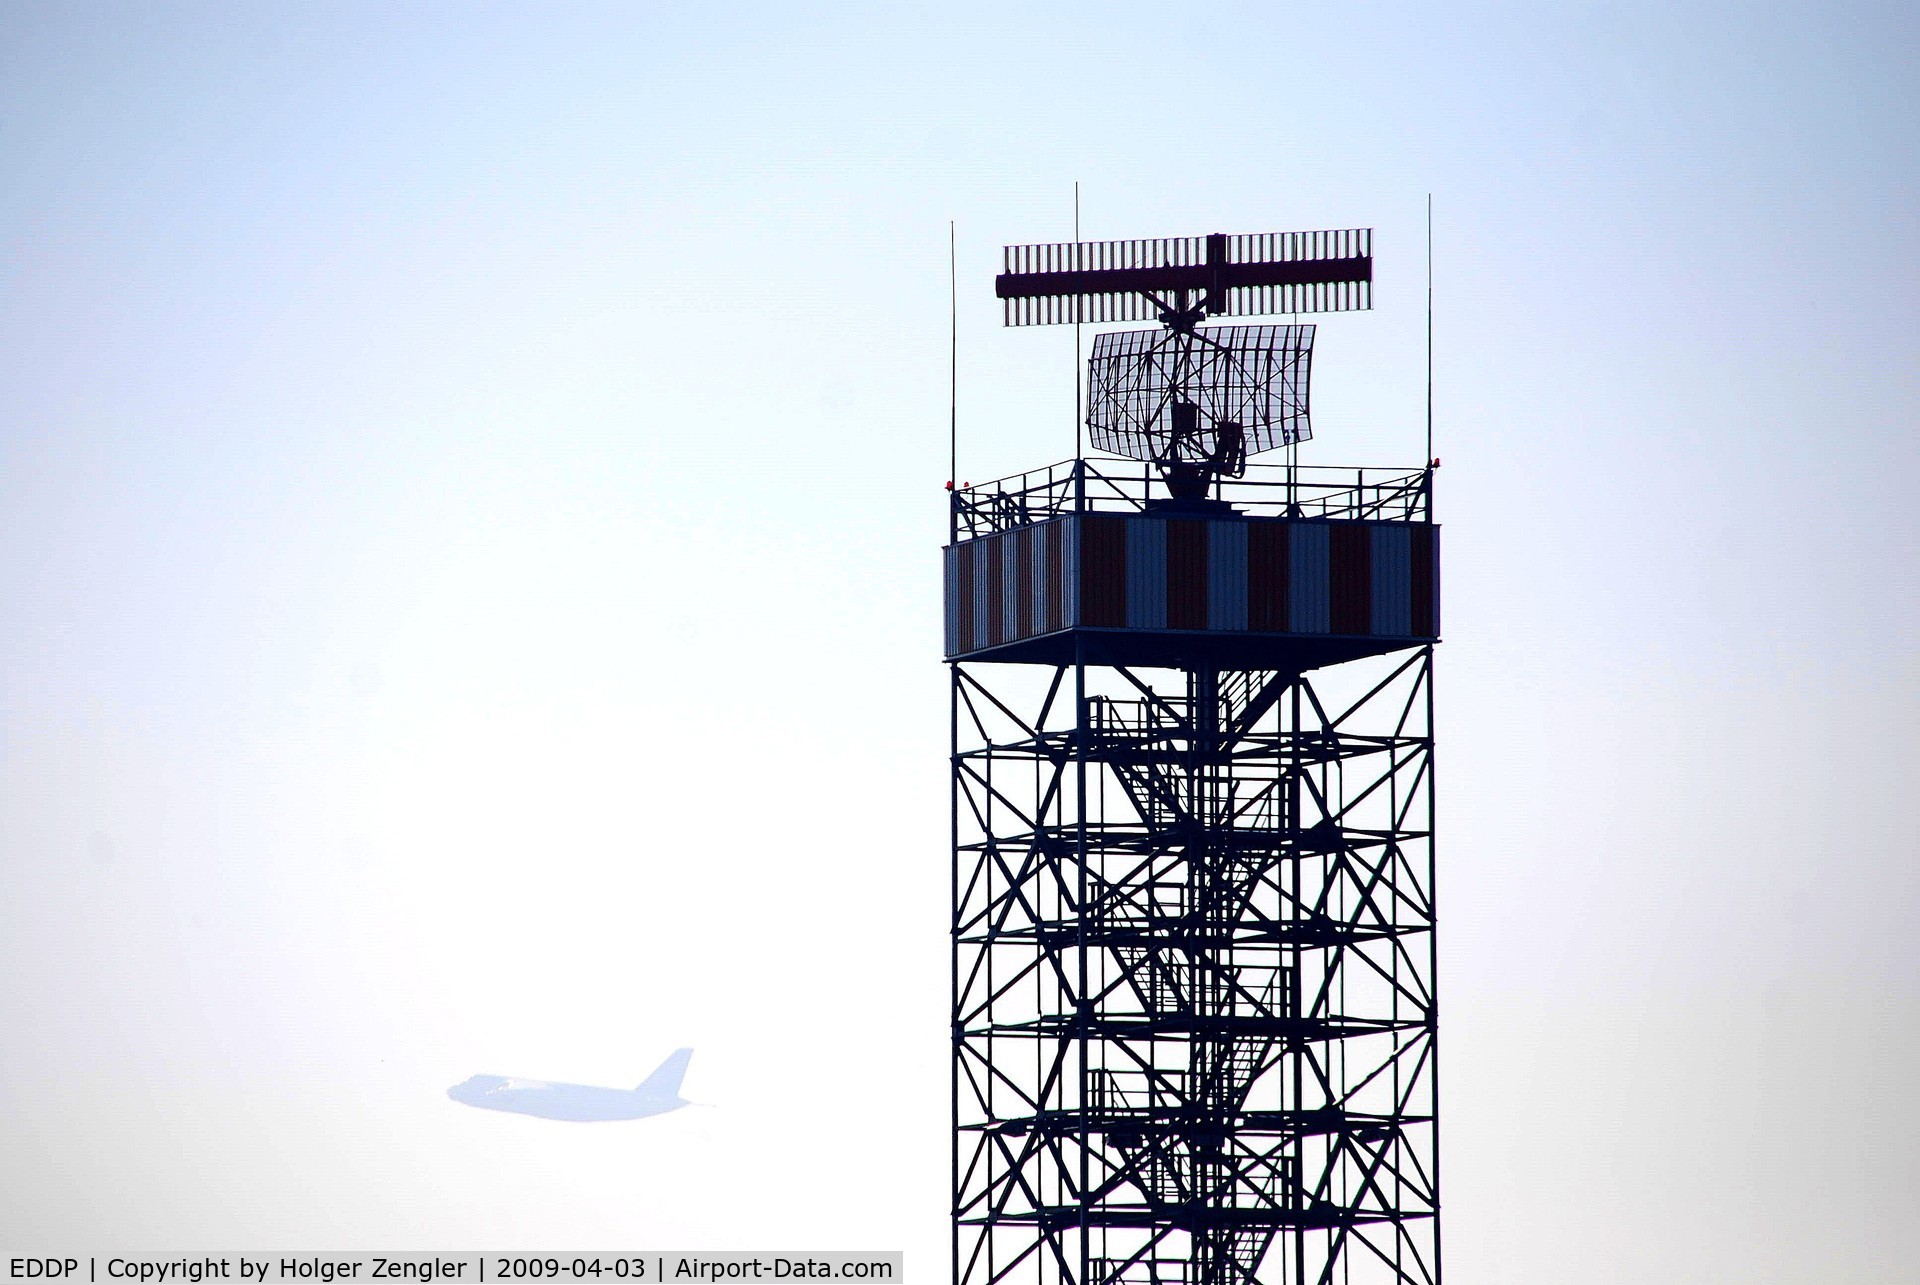 Leipzig/Halle Airport, Leipzig/Halle Germany (EDDP) - The old radar tower in dusty morning light